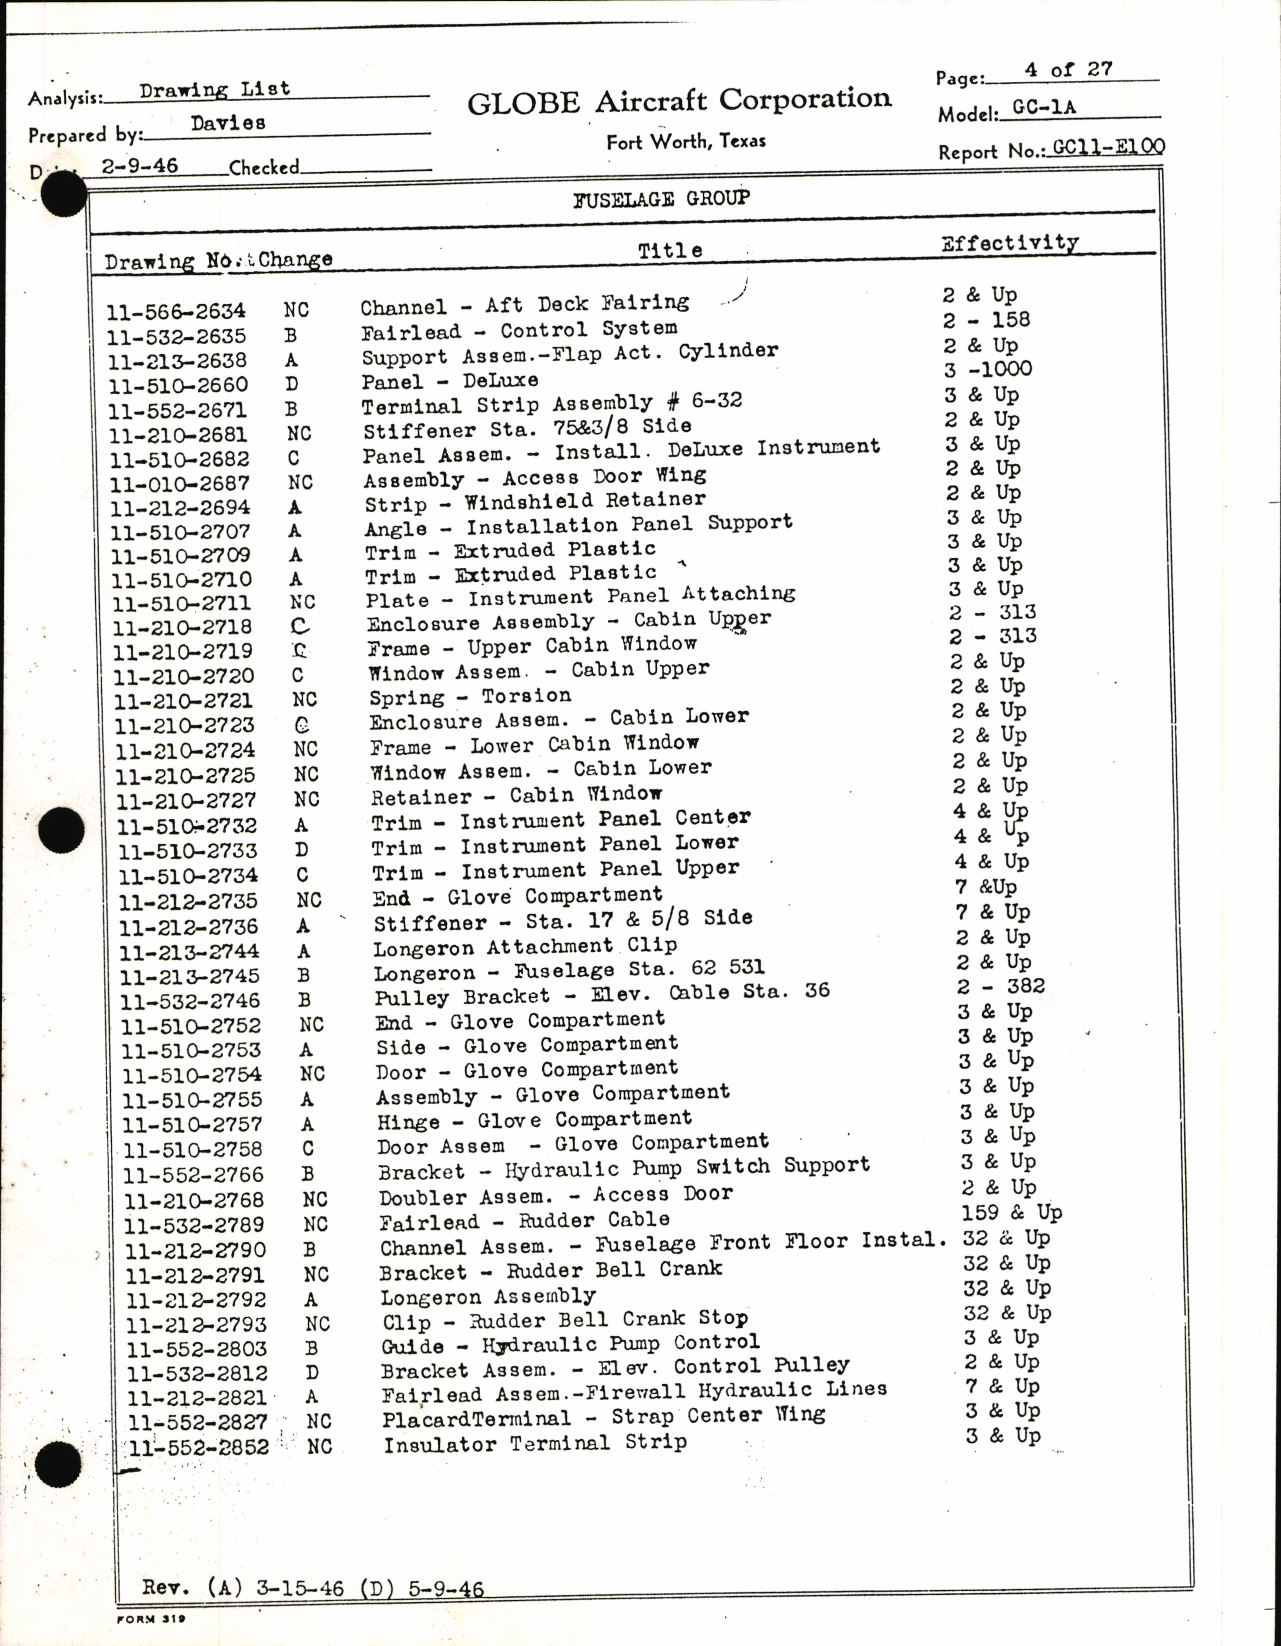 Sample page 7 from AirCorps Library document: Globe Drawing List